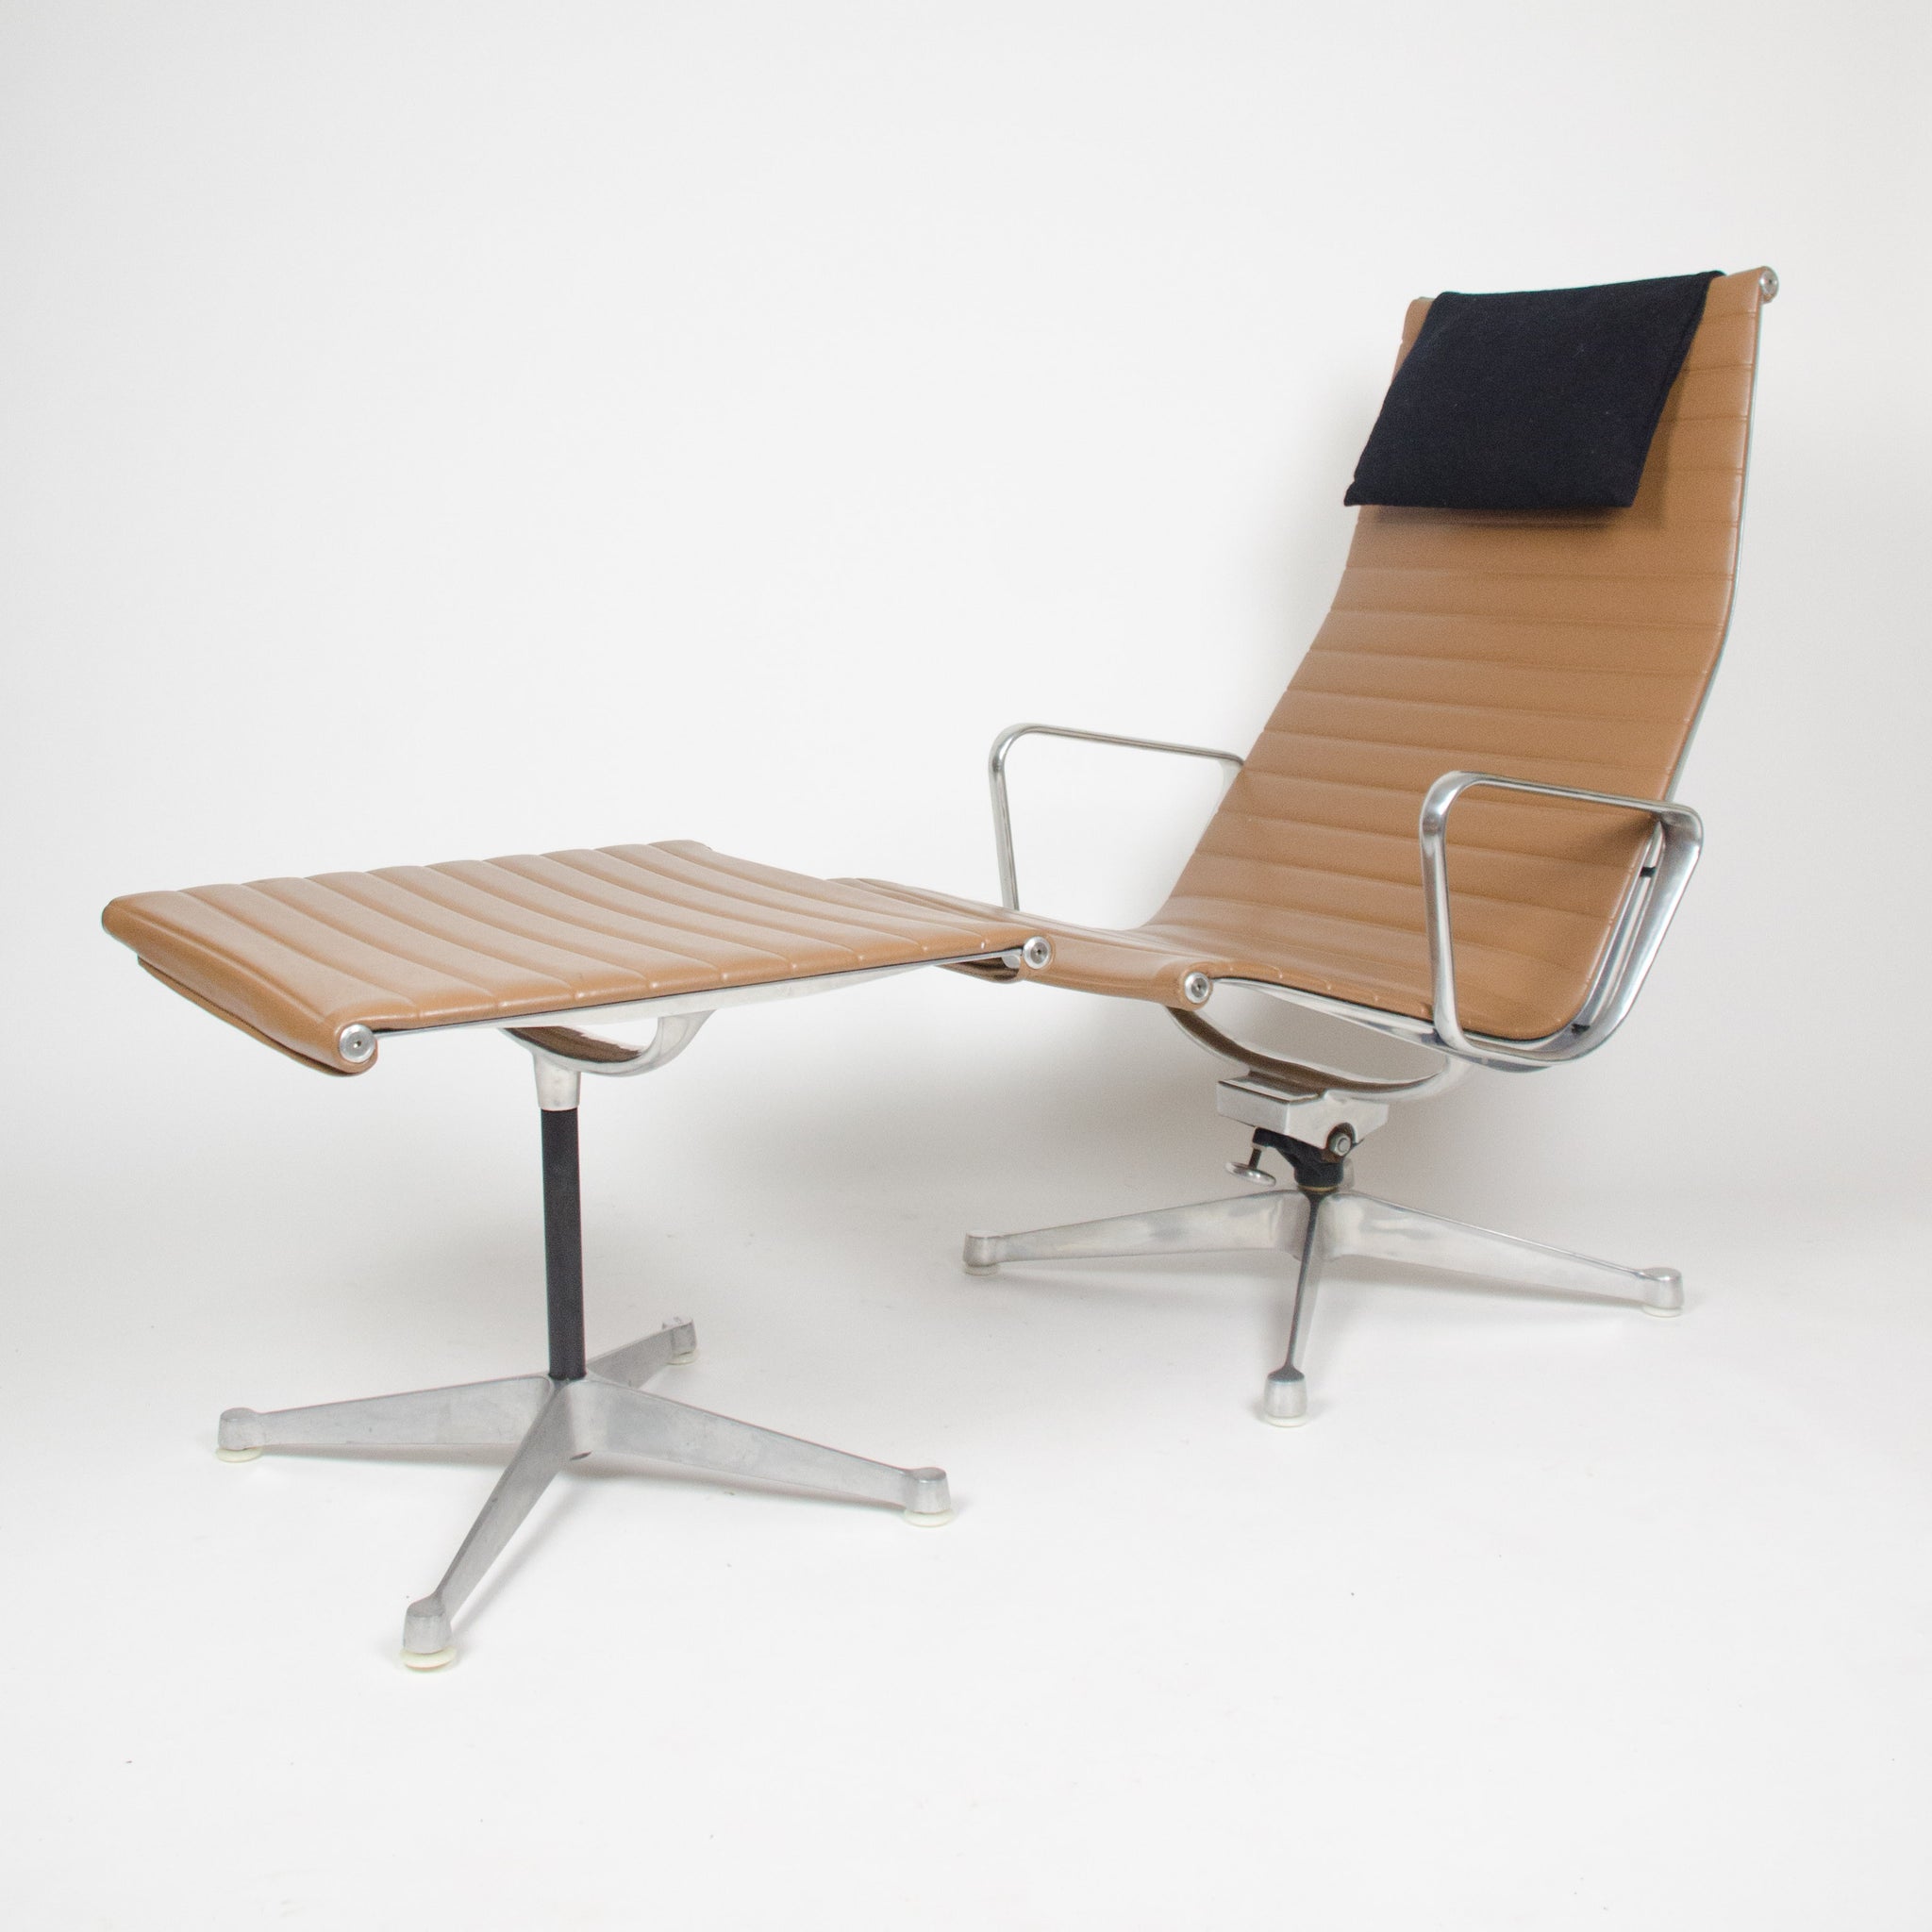 SOLD Eames Herman Miller Aluminum Group Lounge Chair with Ottoman Tan